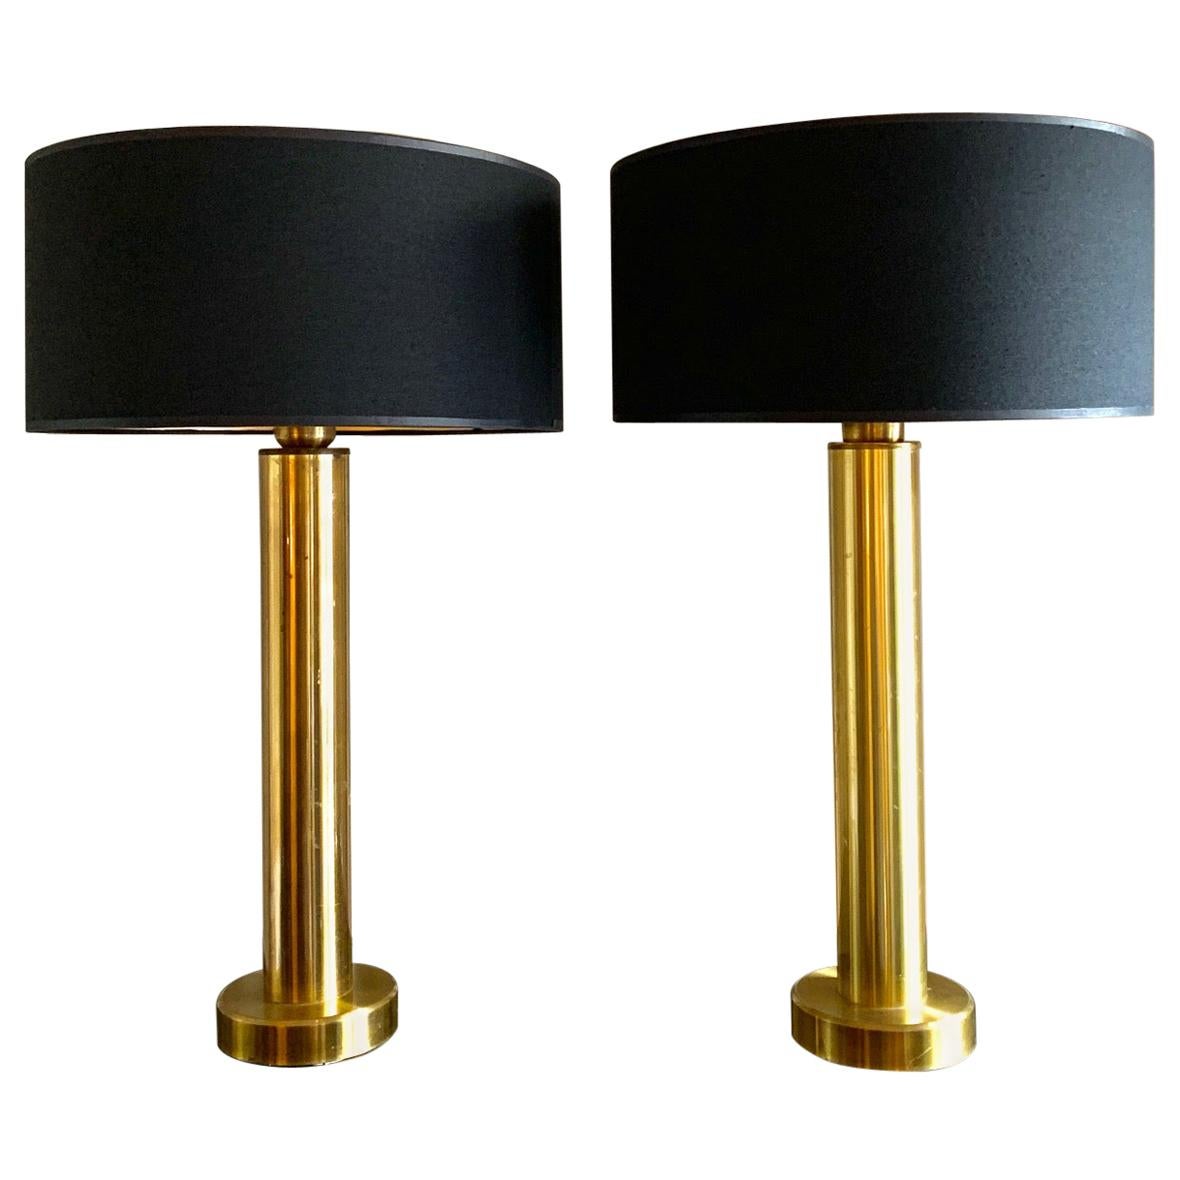 Pair of Swedish Brass Table Lamps by K. Belysning, 1970